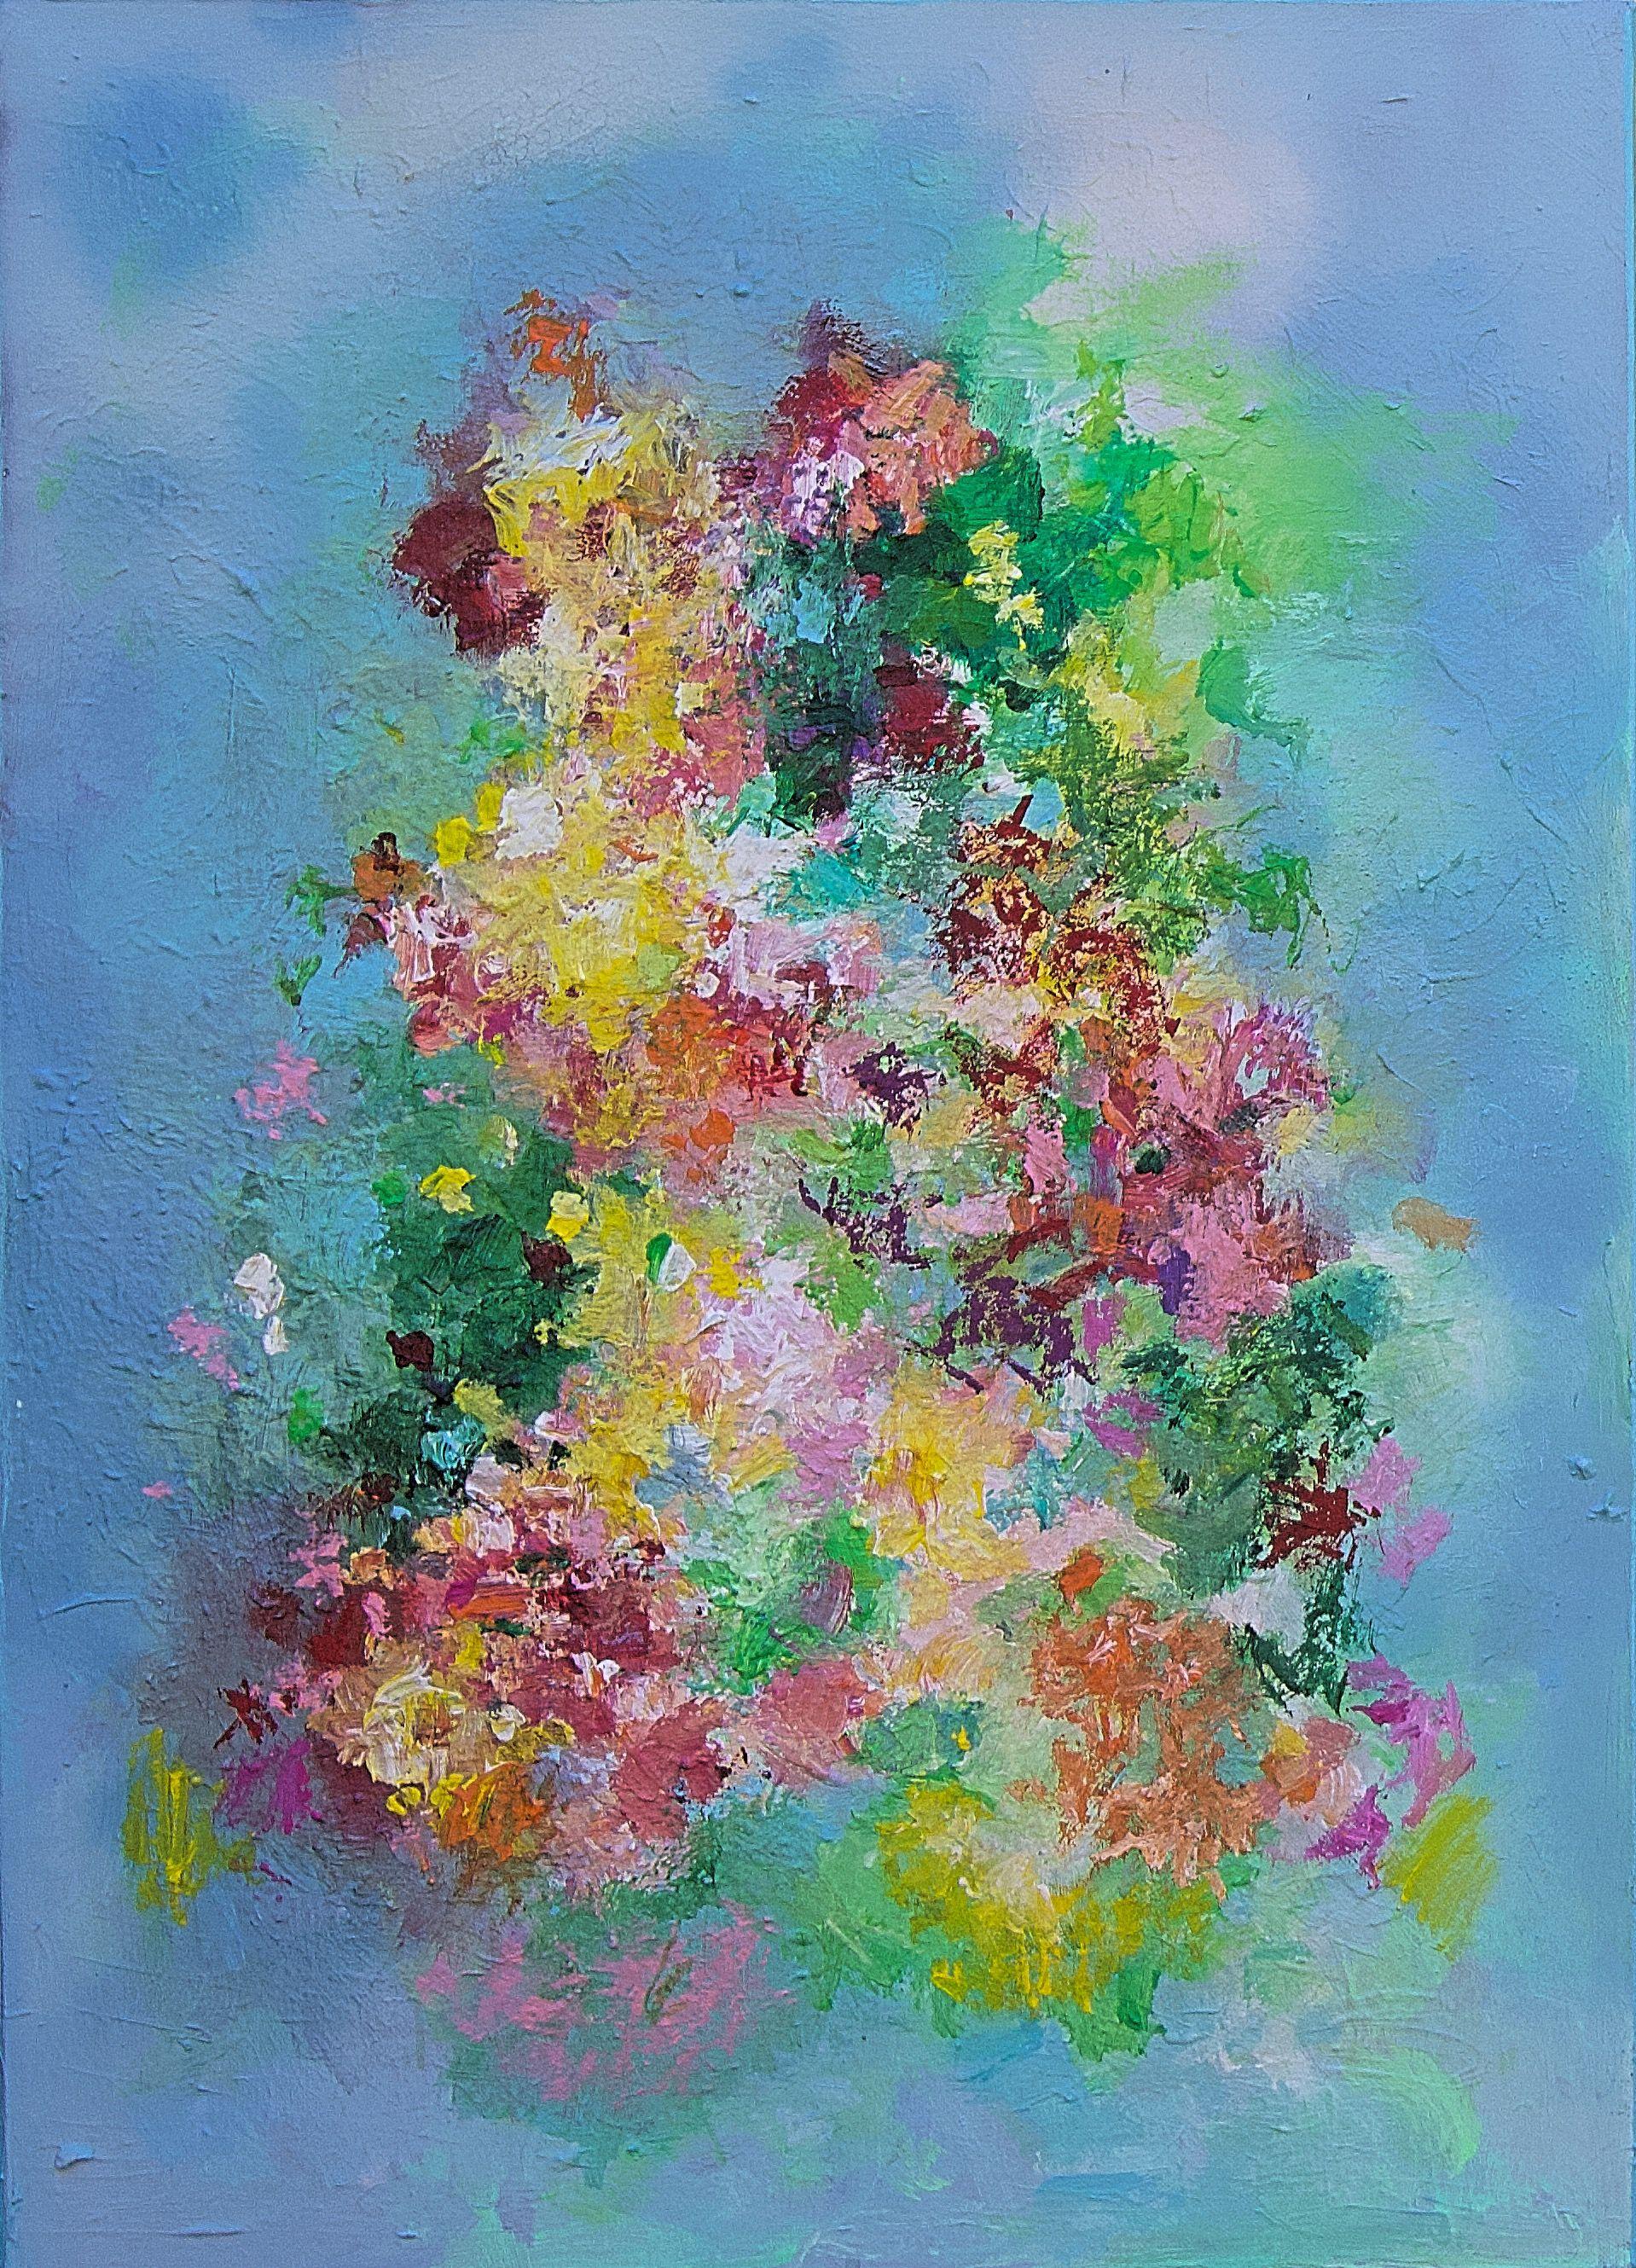 This is a painting of flowers painted in an abstract way.   It is a vertical contemporary painting full of warm and vibrant colors like red, yellow, pink, orange and green.   In the background there is a light blue, like a blue sky with some white.